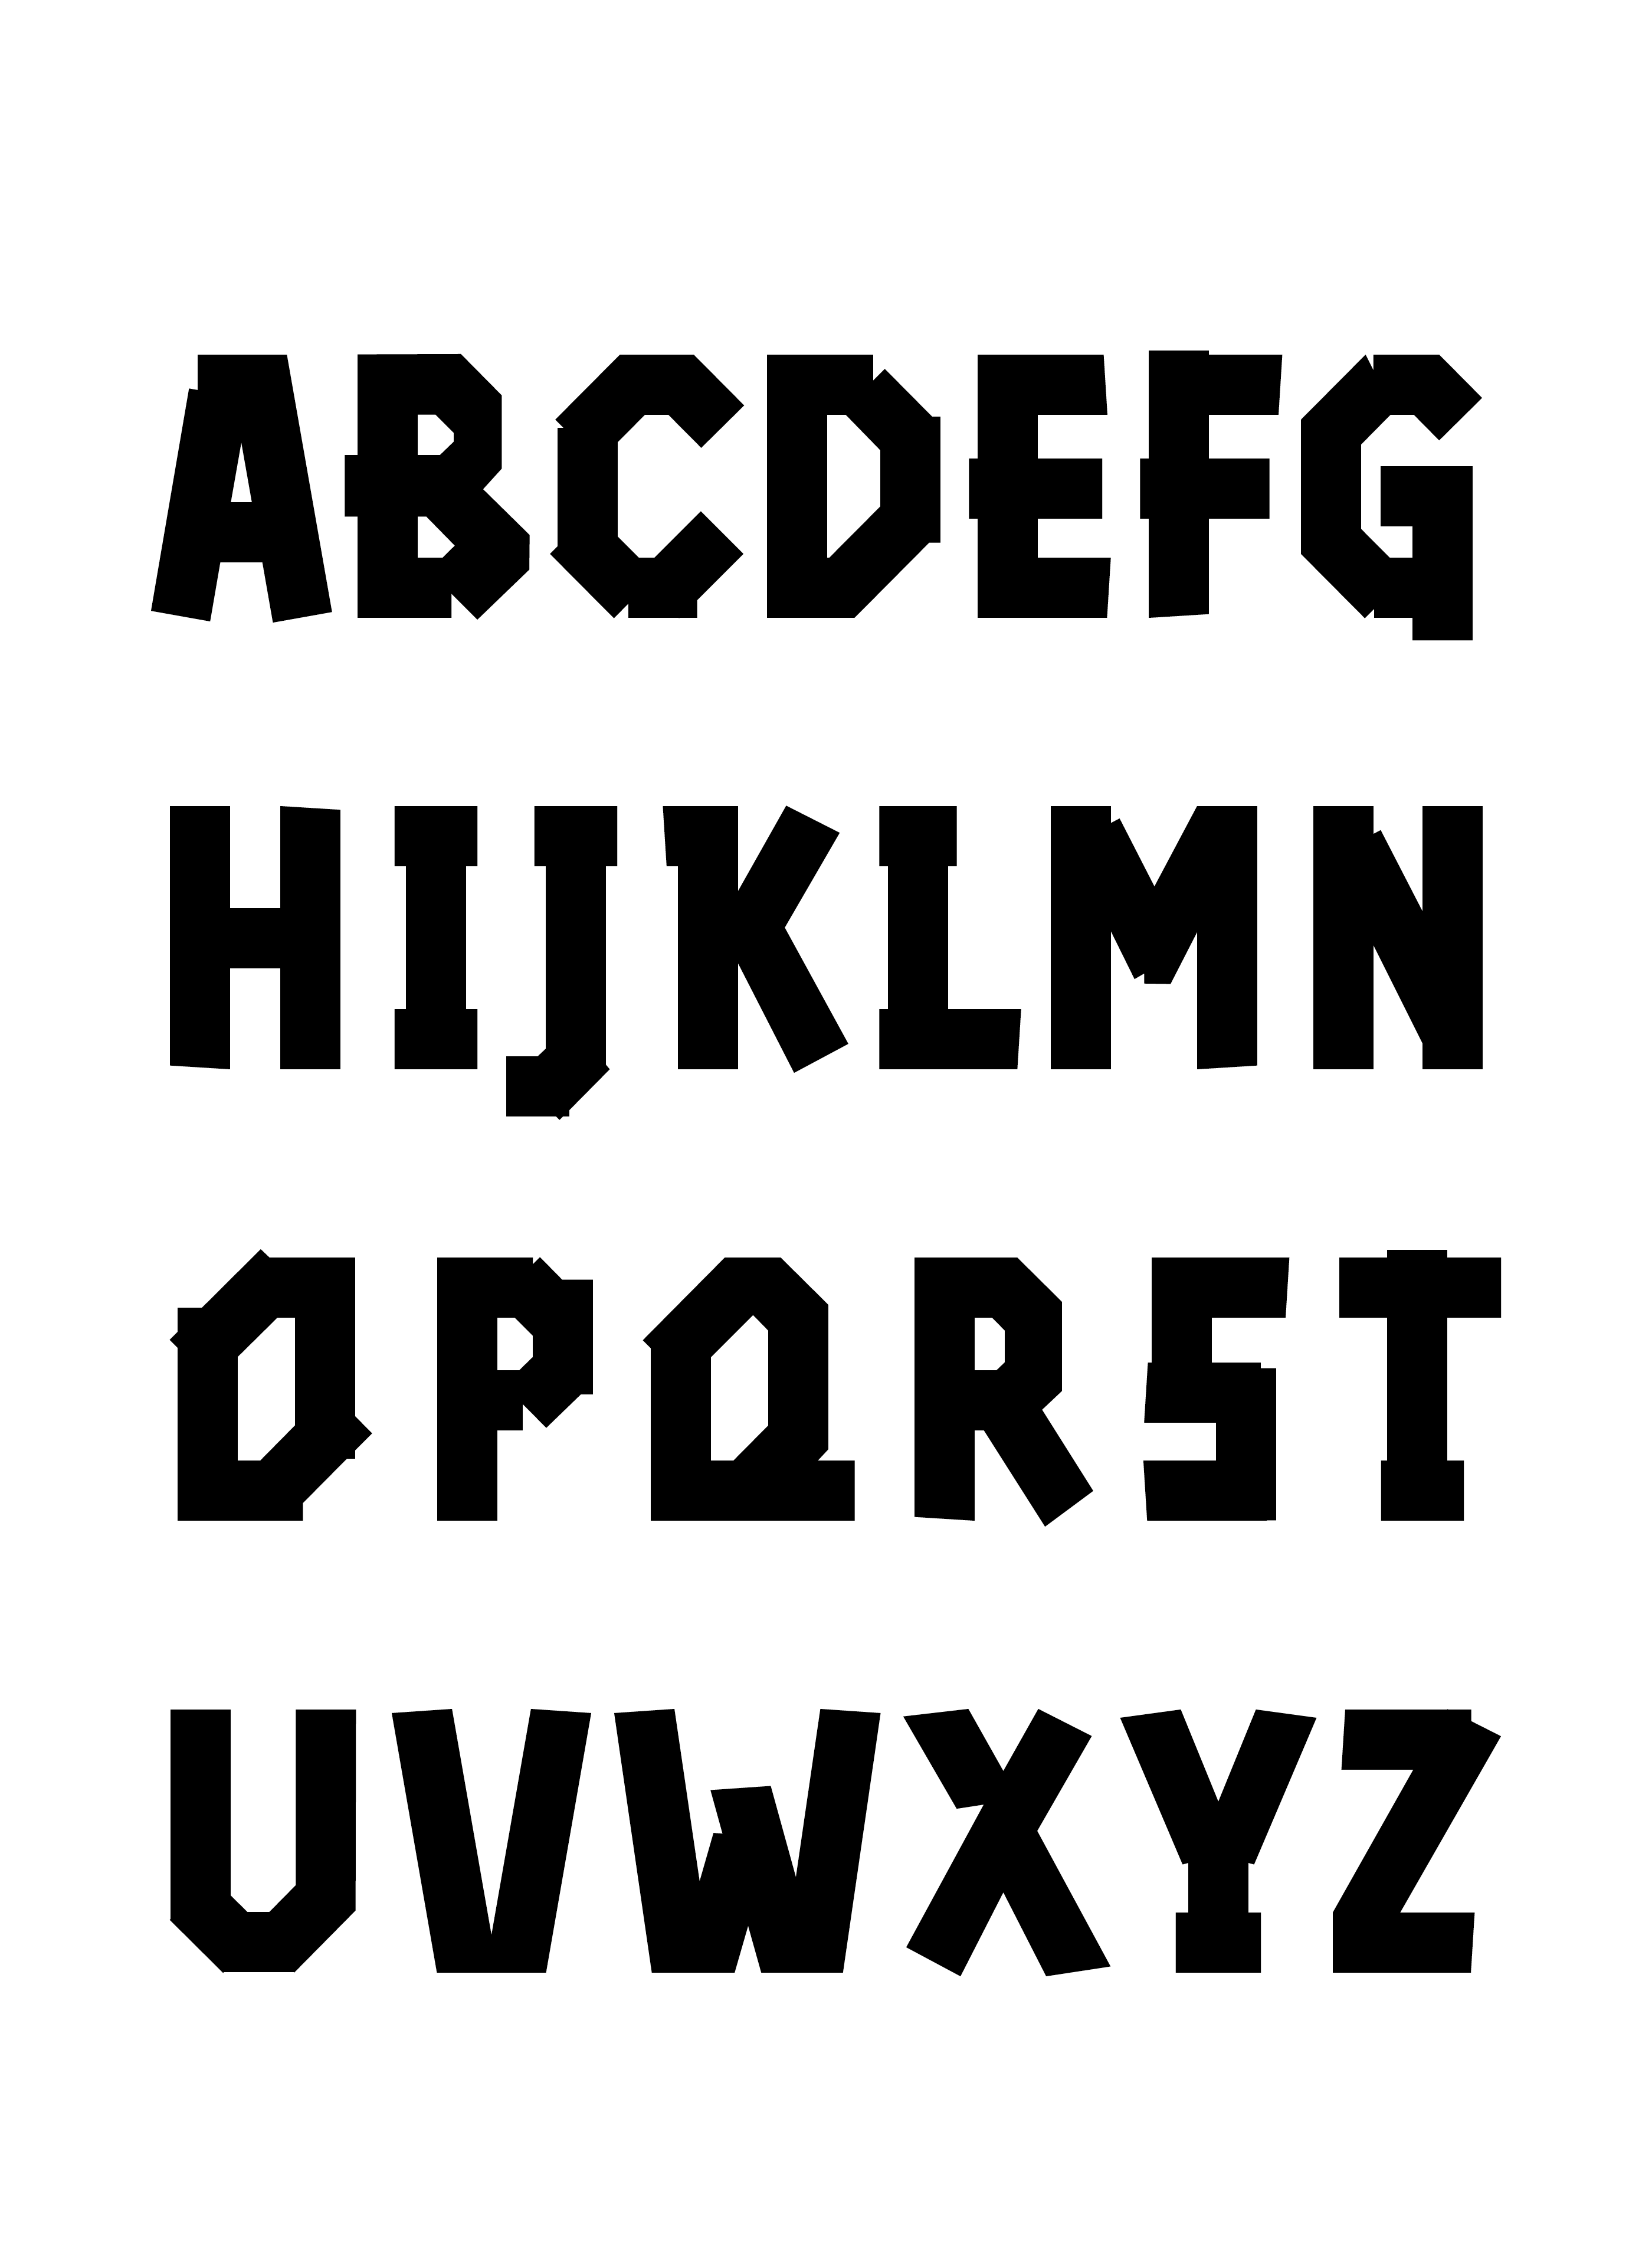 Custom font for a theatre performance